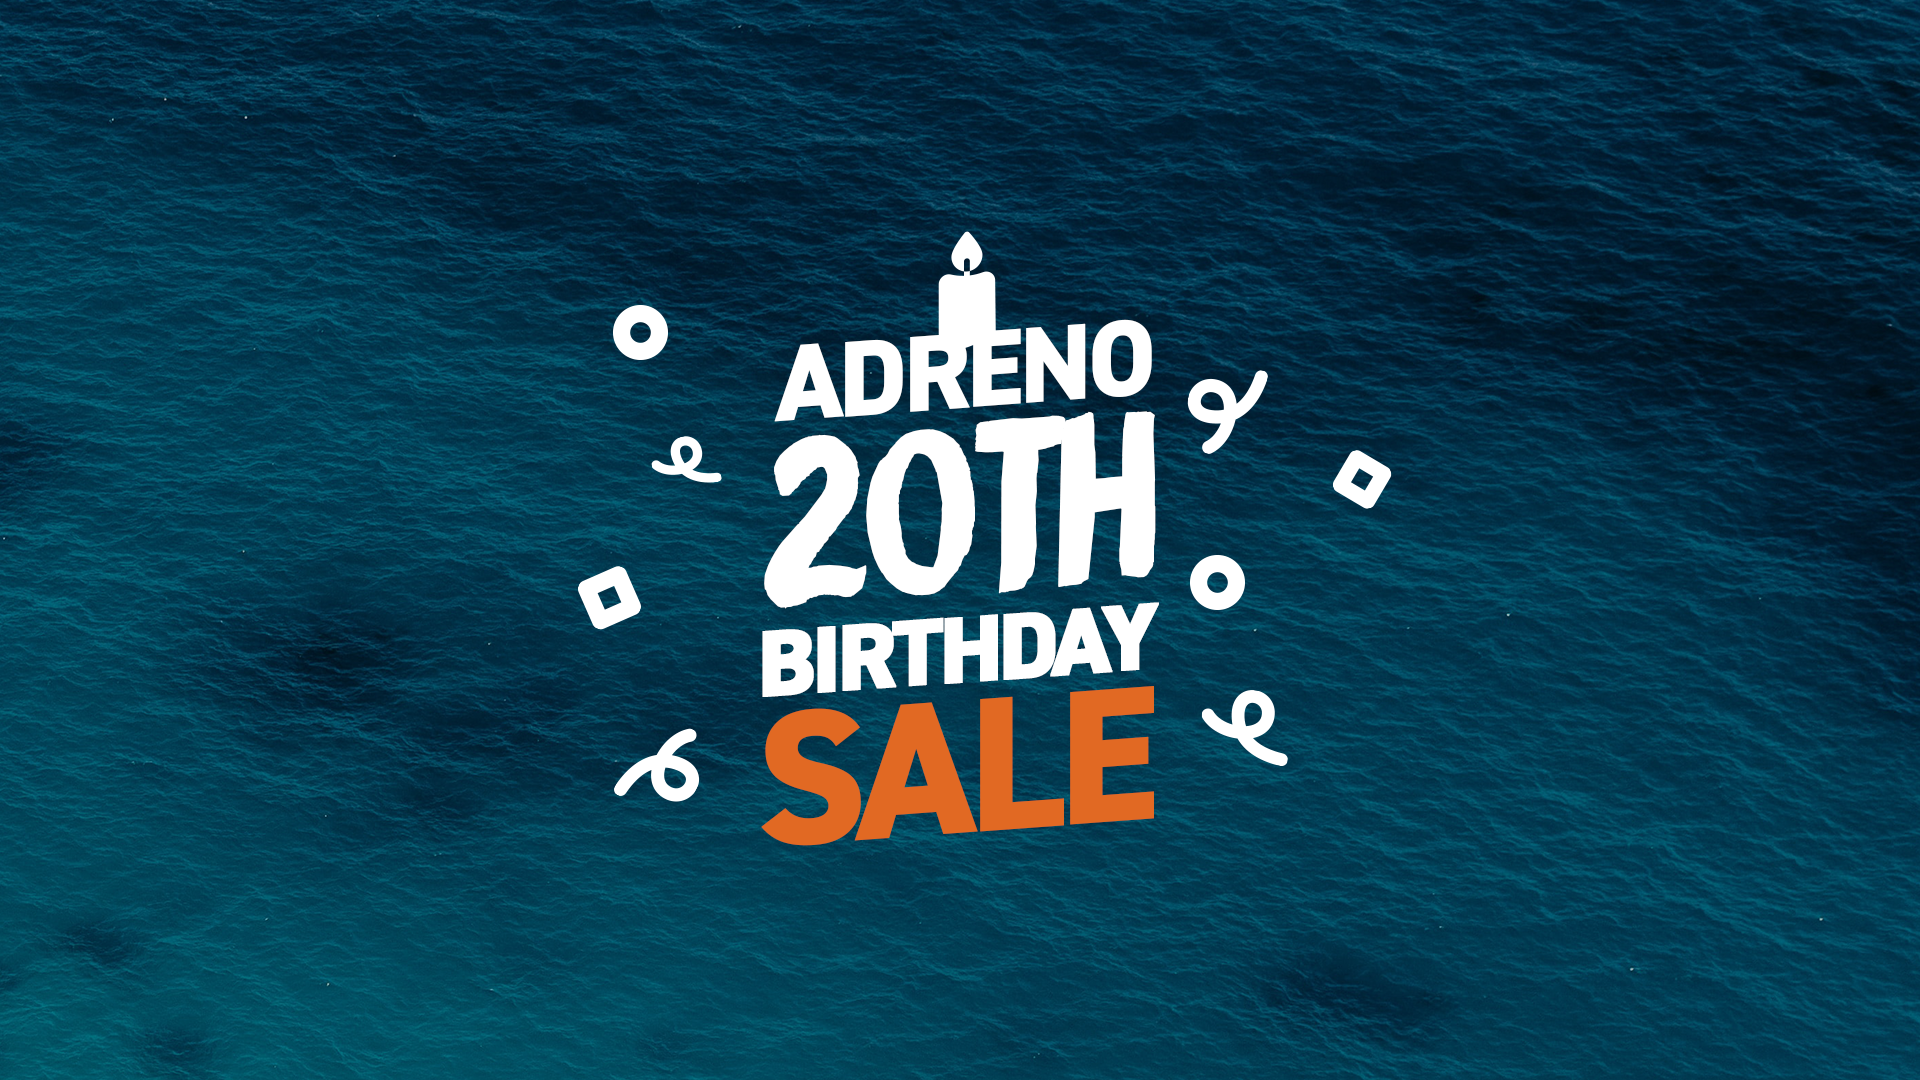 The Adreno Story: 20th Birthday Sale Special